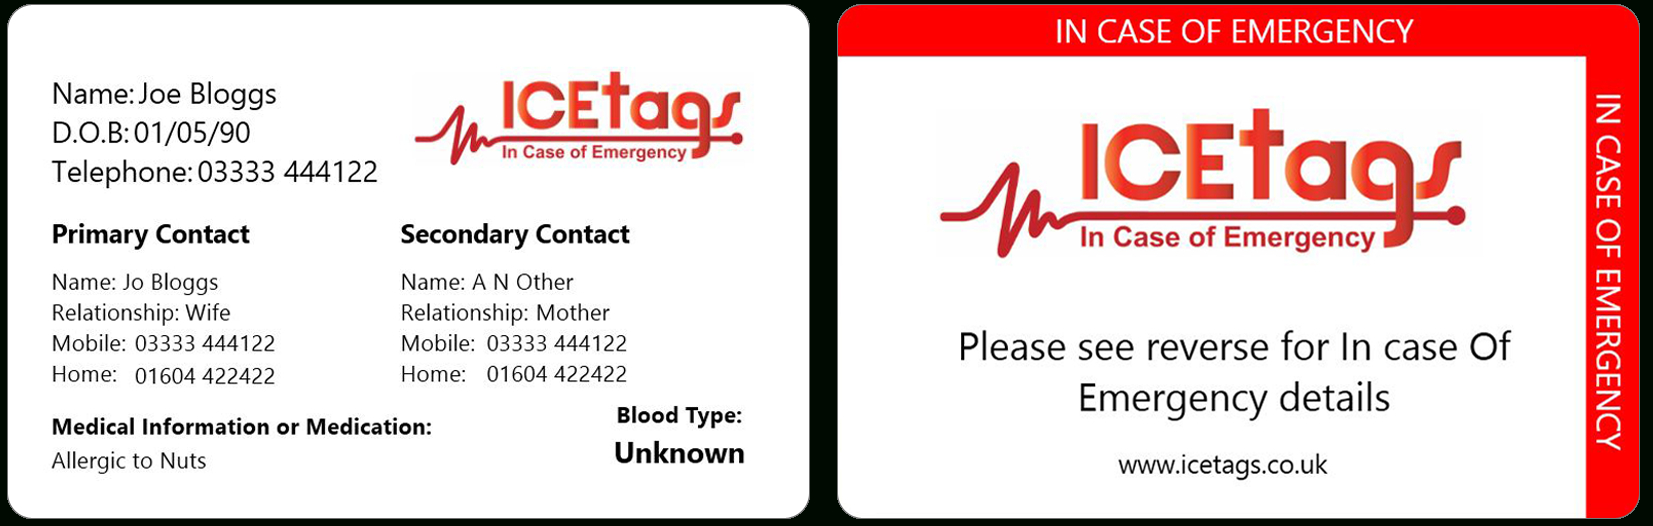 Ice Wallet Card | Full Size Icetags | Free Uk Delivery Regarding Medical Alert Wallet Card Template